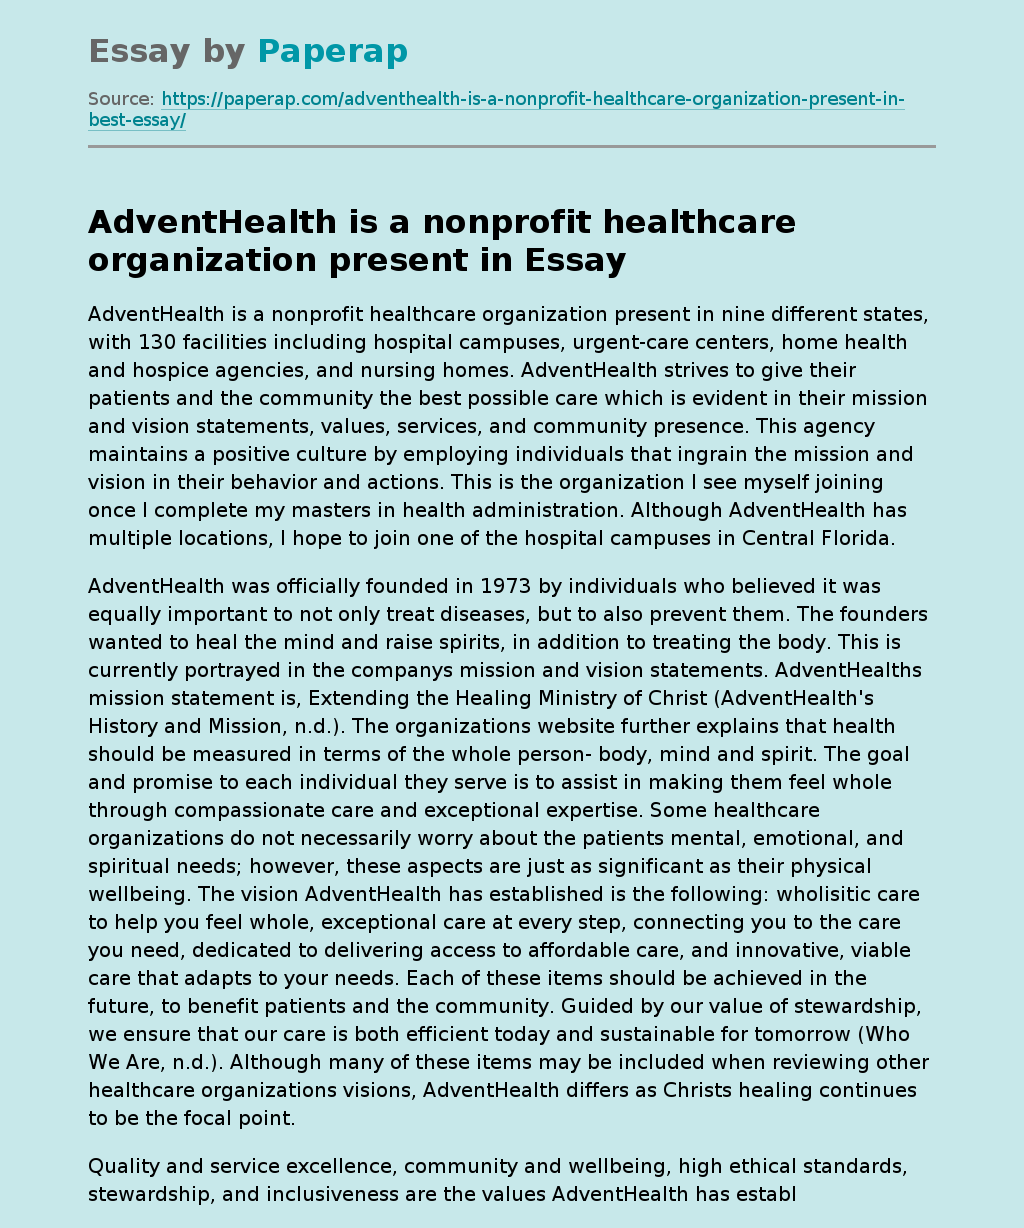 AdventHealth is a nonprofit healthcare organization present in